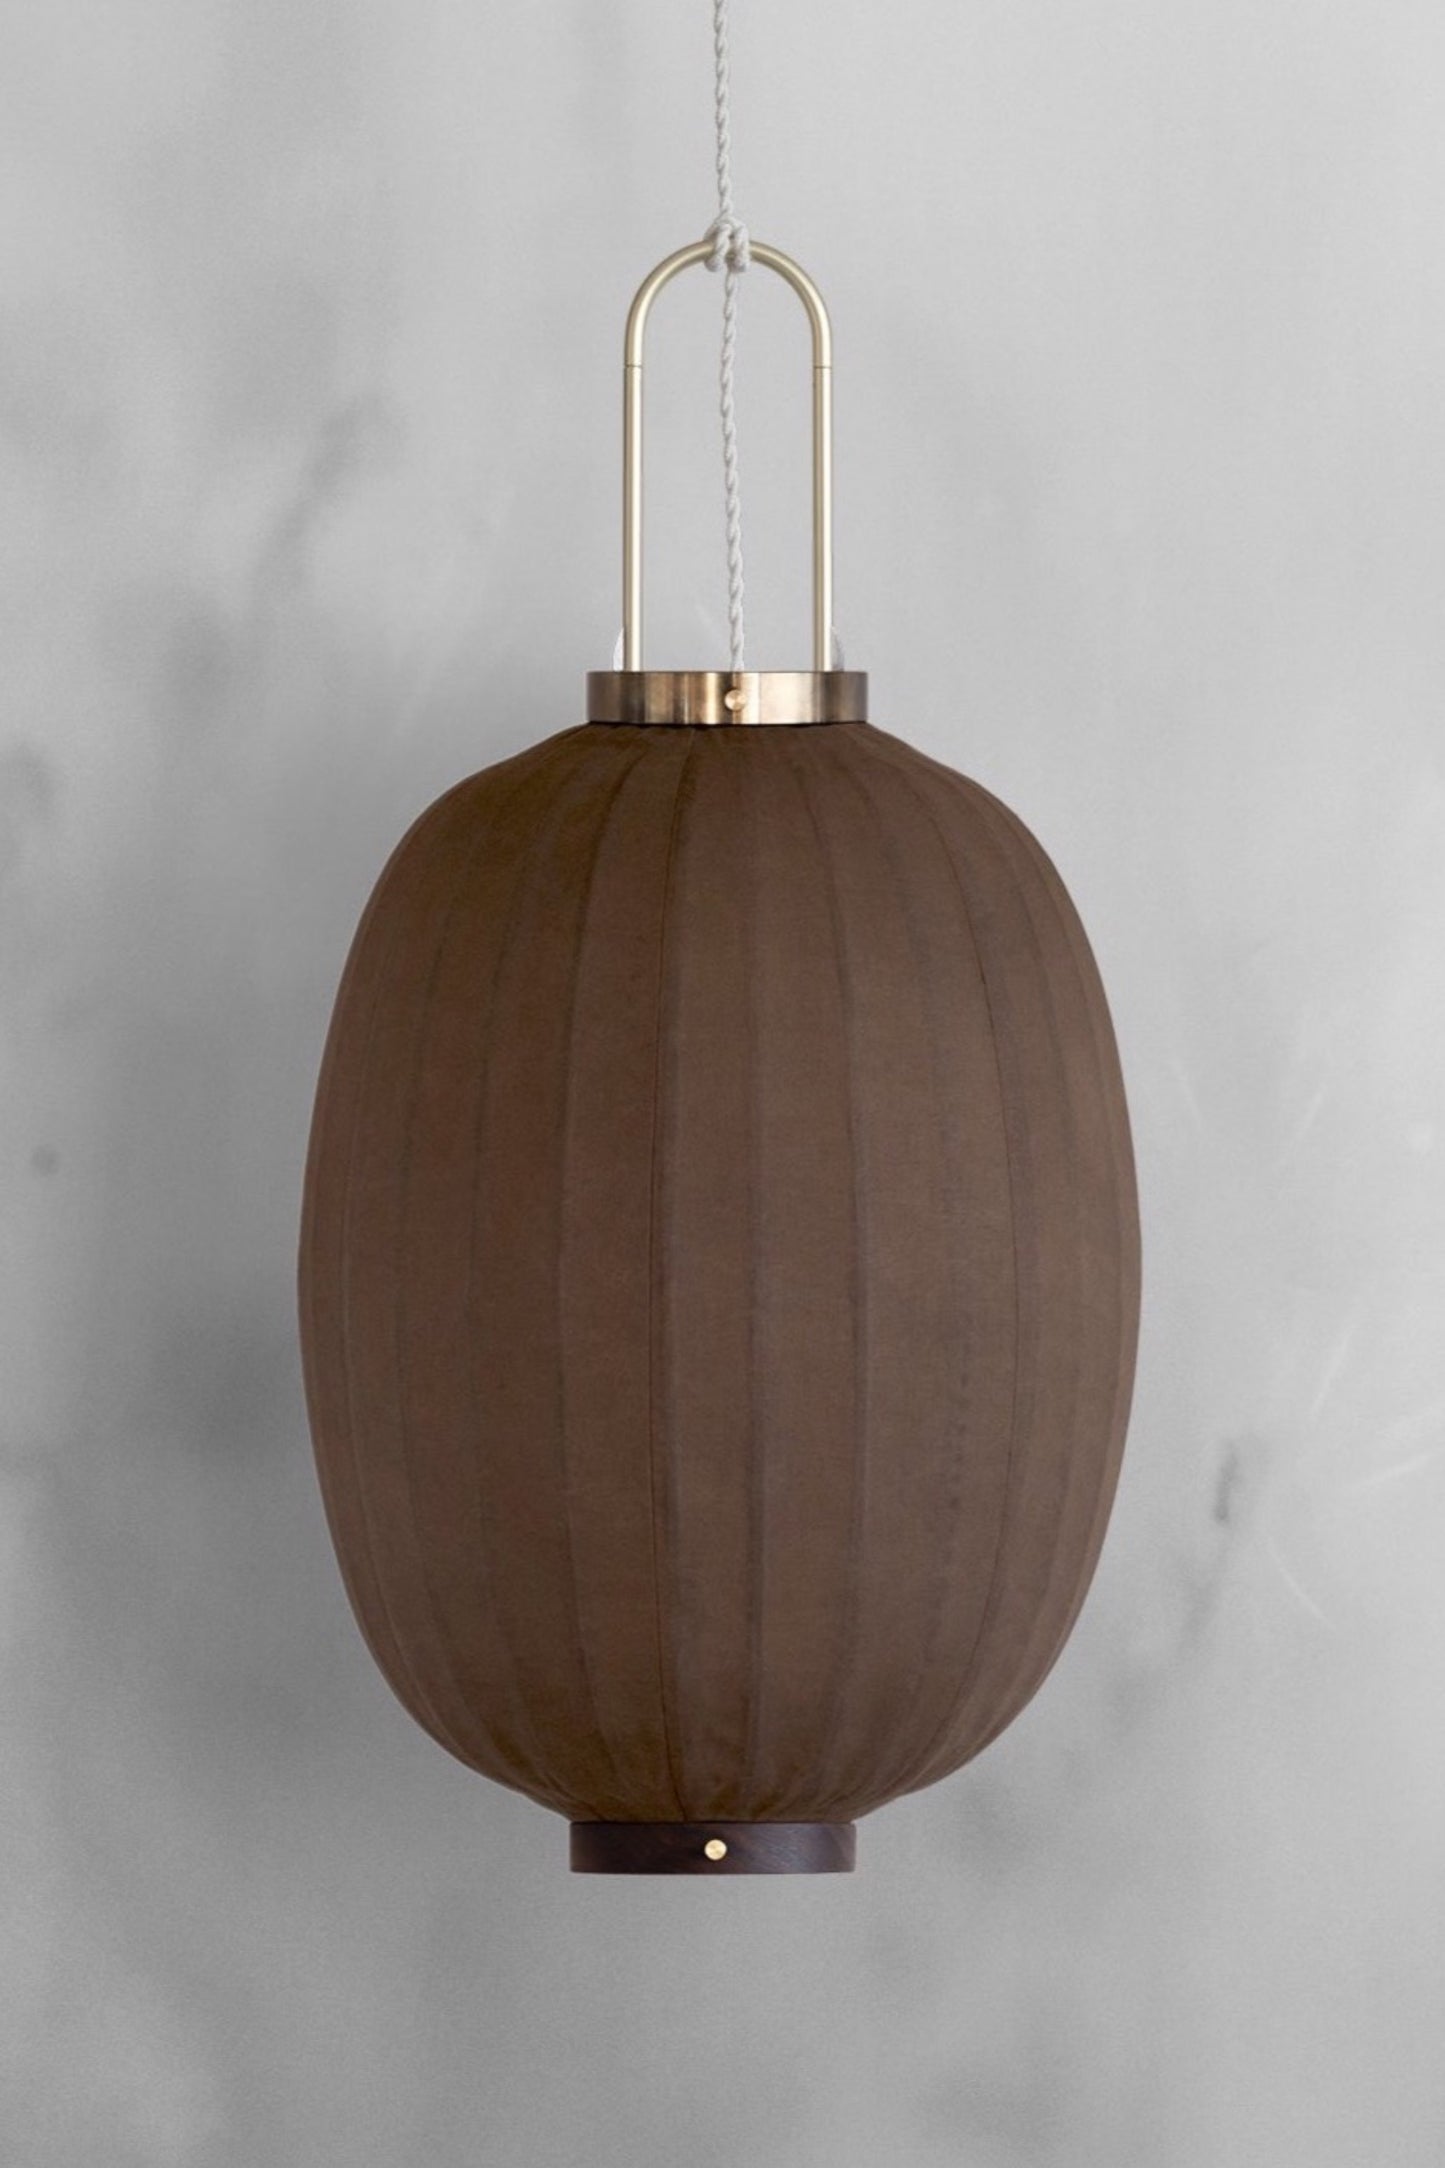 The Oval shape Plant Dyed Lantern Brown by Taiwan Lantern.